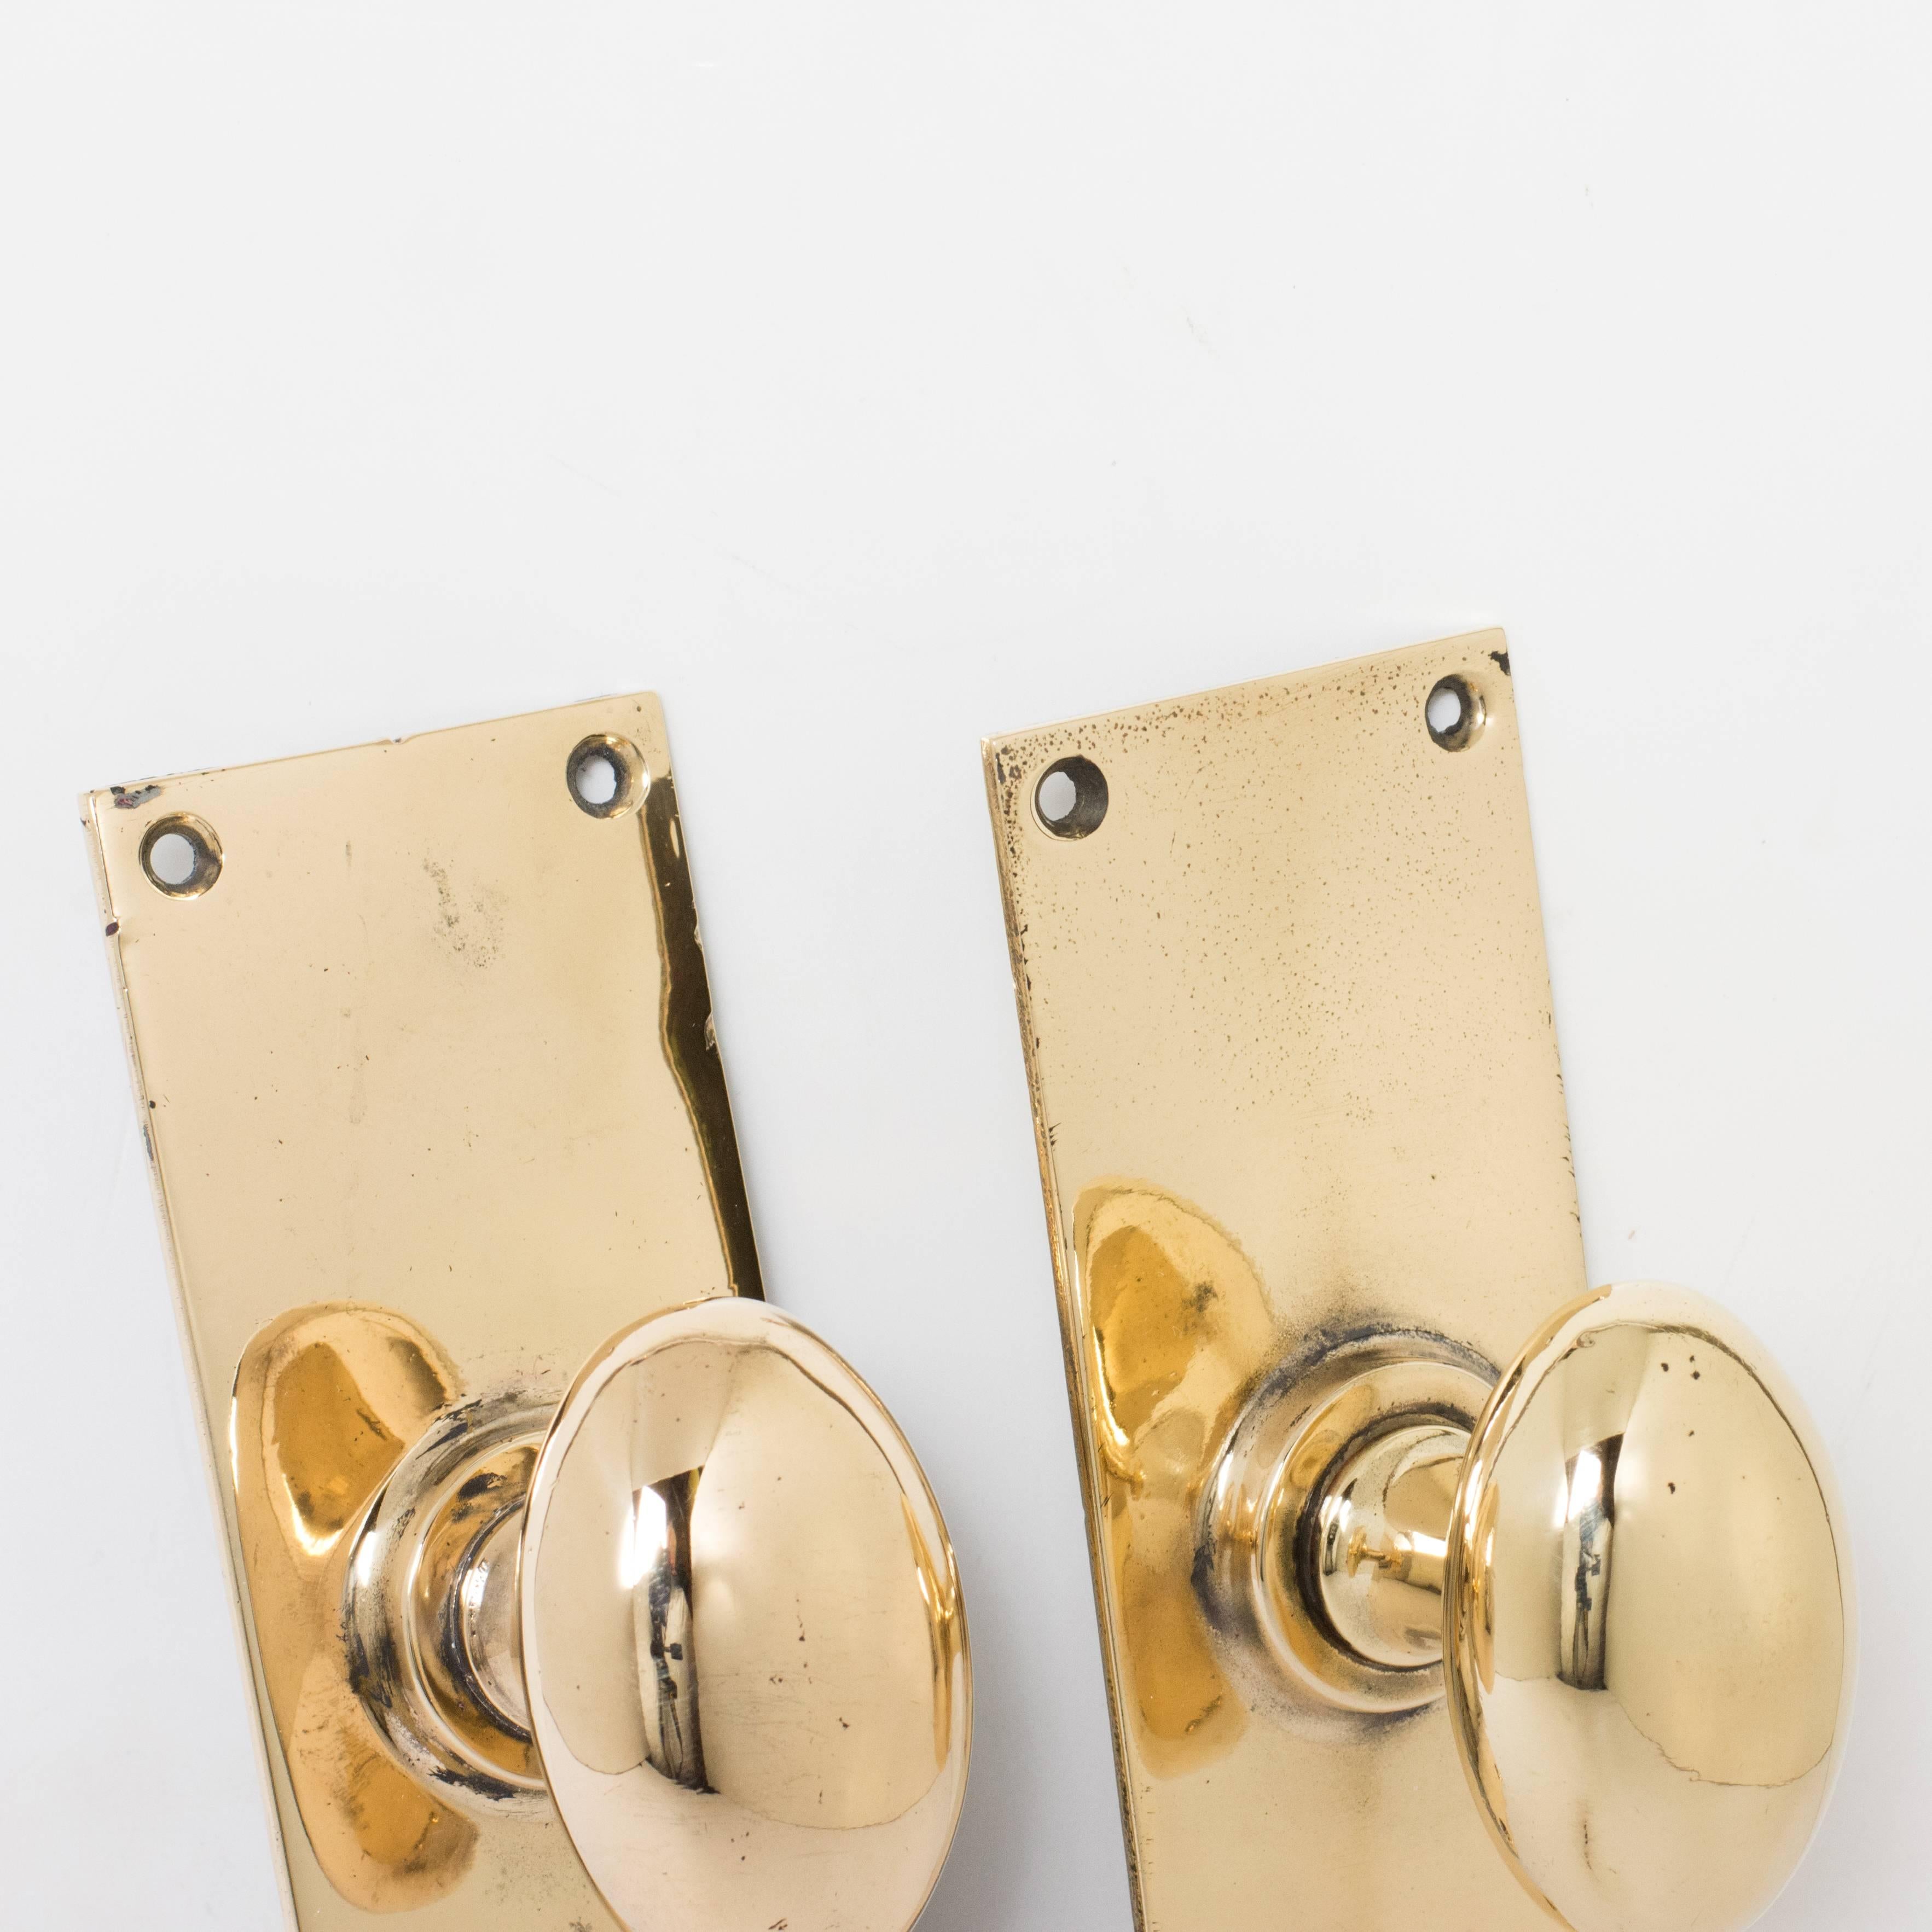 1920s oval rose brass door knobs, 3 pairs available, with rectangular backplates.

Dimensions: 15.5cm (6